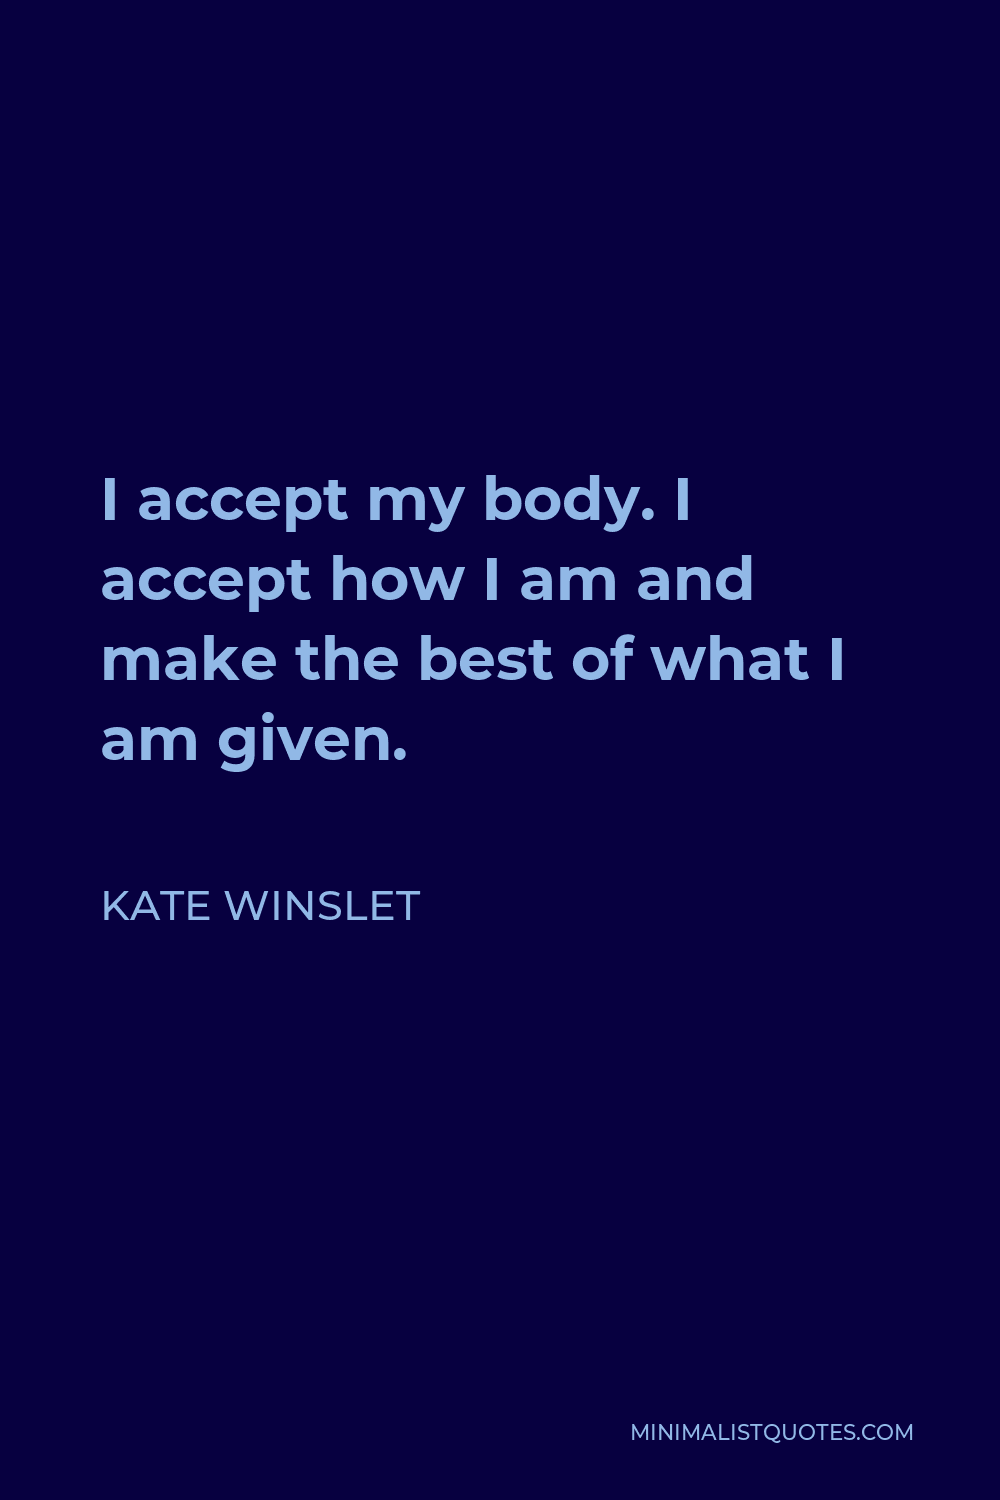 Kate Winslet Quote - I accept my body. I accept how I am and make the best of what I am given. Children orientate towards examples. That’s why I talk solely positive about my body in front of my daughter.